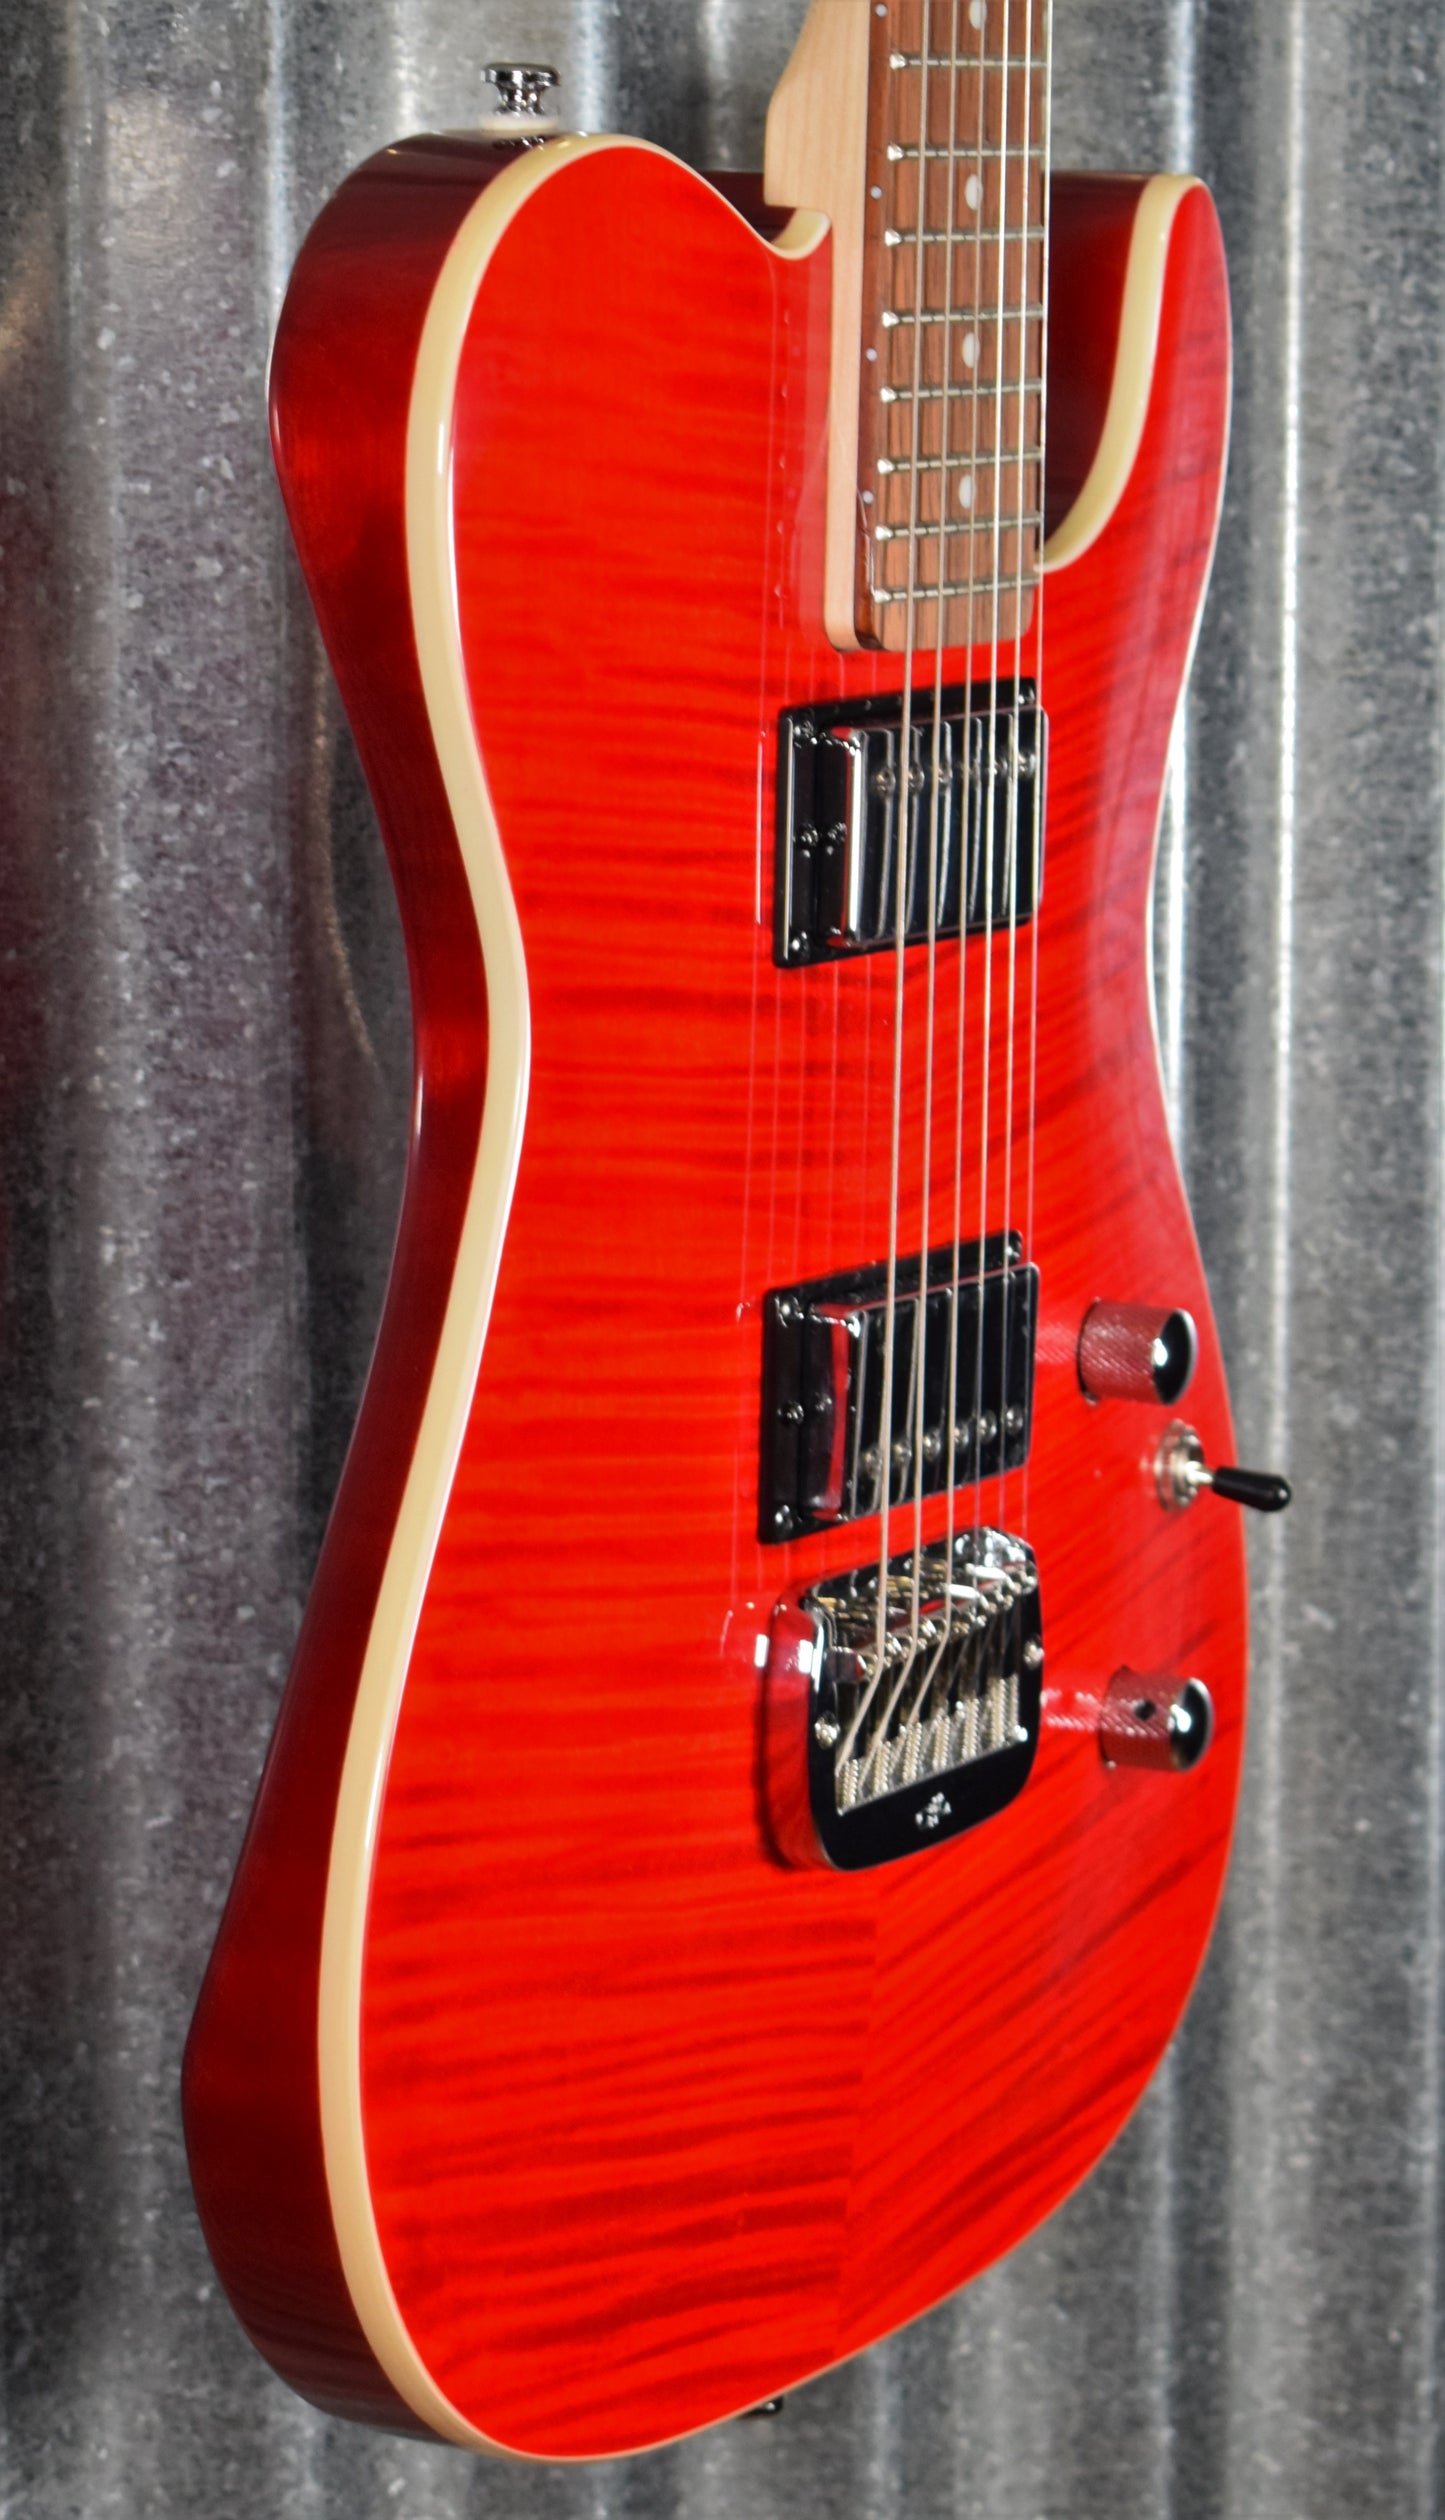 G&L Tribute ASAT Deluxe Carved Top Trans Red Guitar #9804 Demo